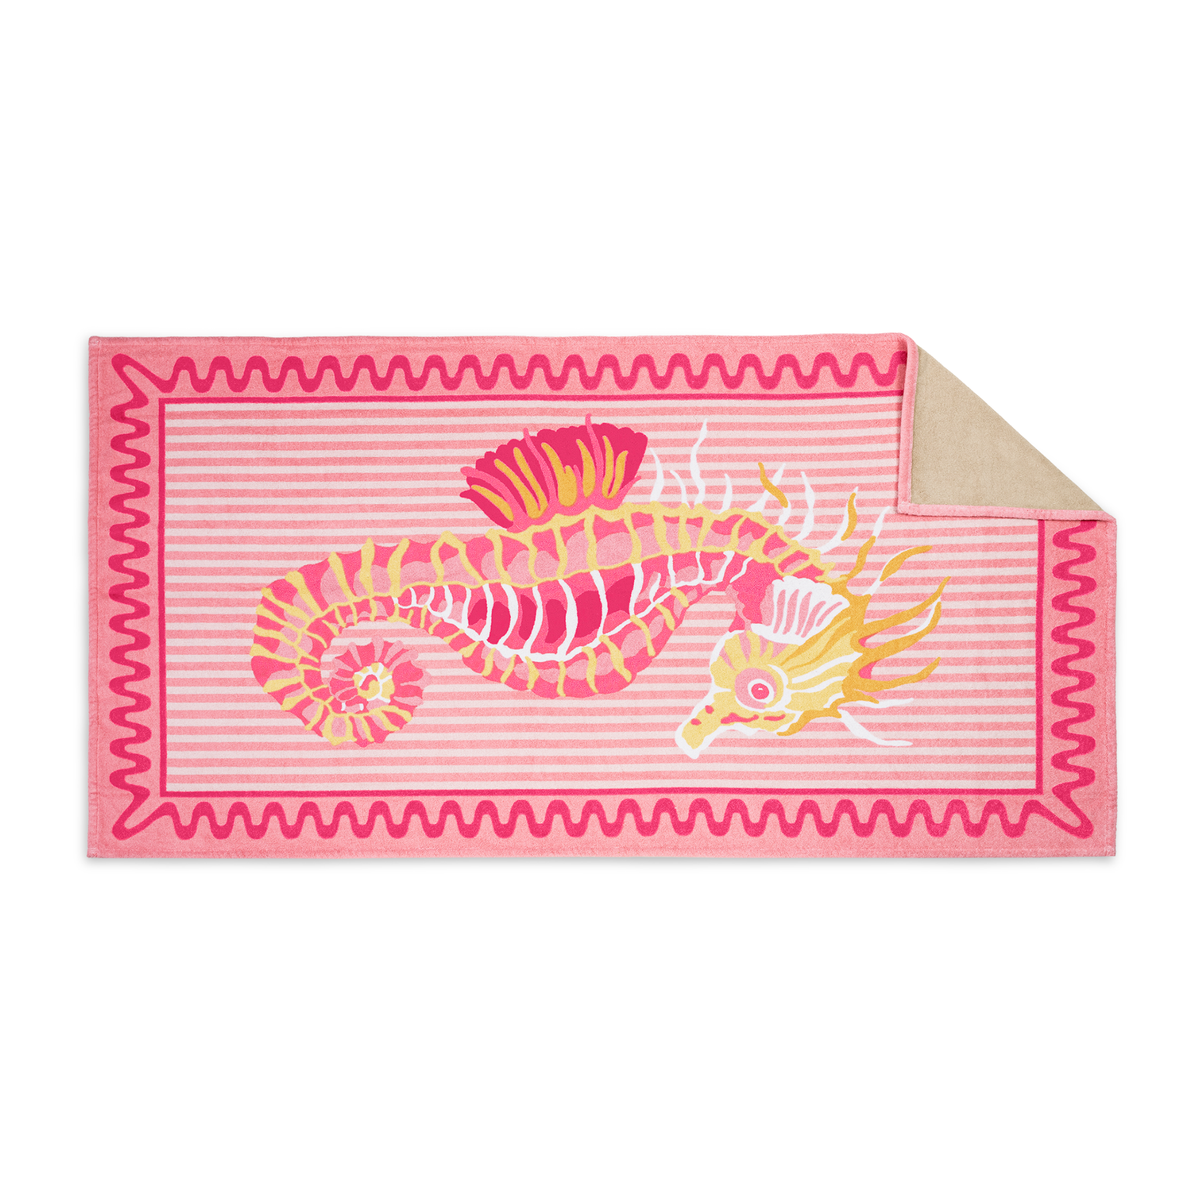 Matouk Schumacher Seahorse Beach Towels in Pink Coral Color